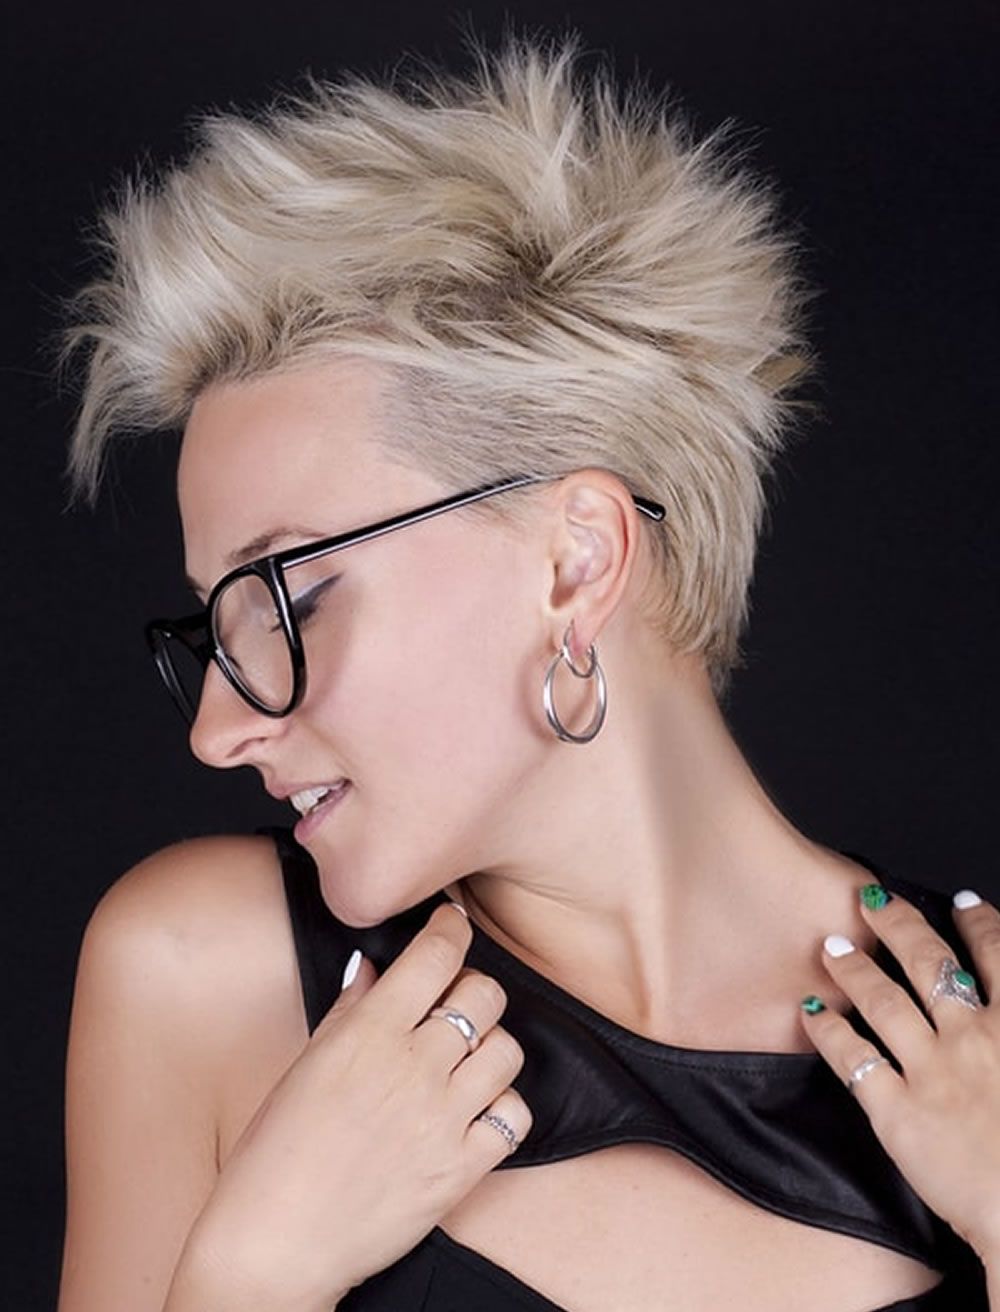 Fashionable The Pixie Slash Mohawk Hairstyles With 2018 Short Hairstyles And Haircuts For Women20 Popular Pixie Hair (View 1 of 20)